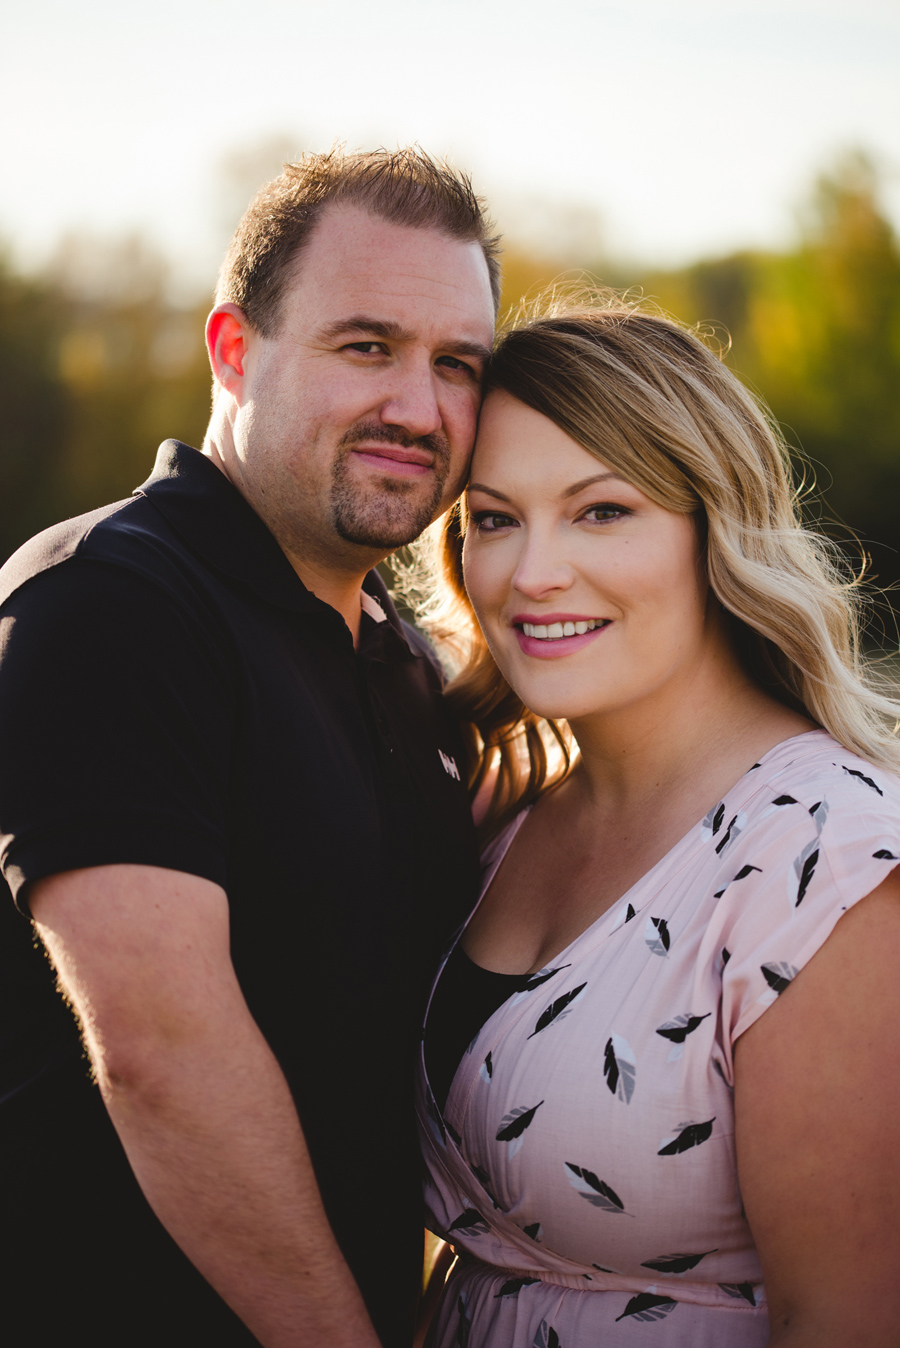 bbcollective_yeg_2016_marilynandian_engagement_photography023.jpg